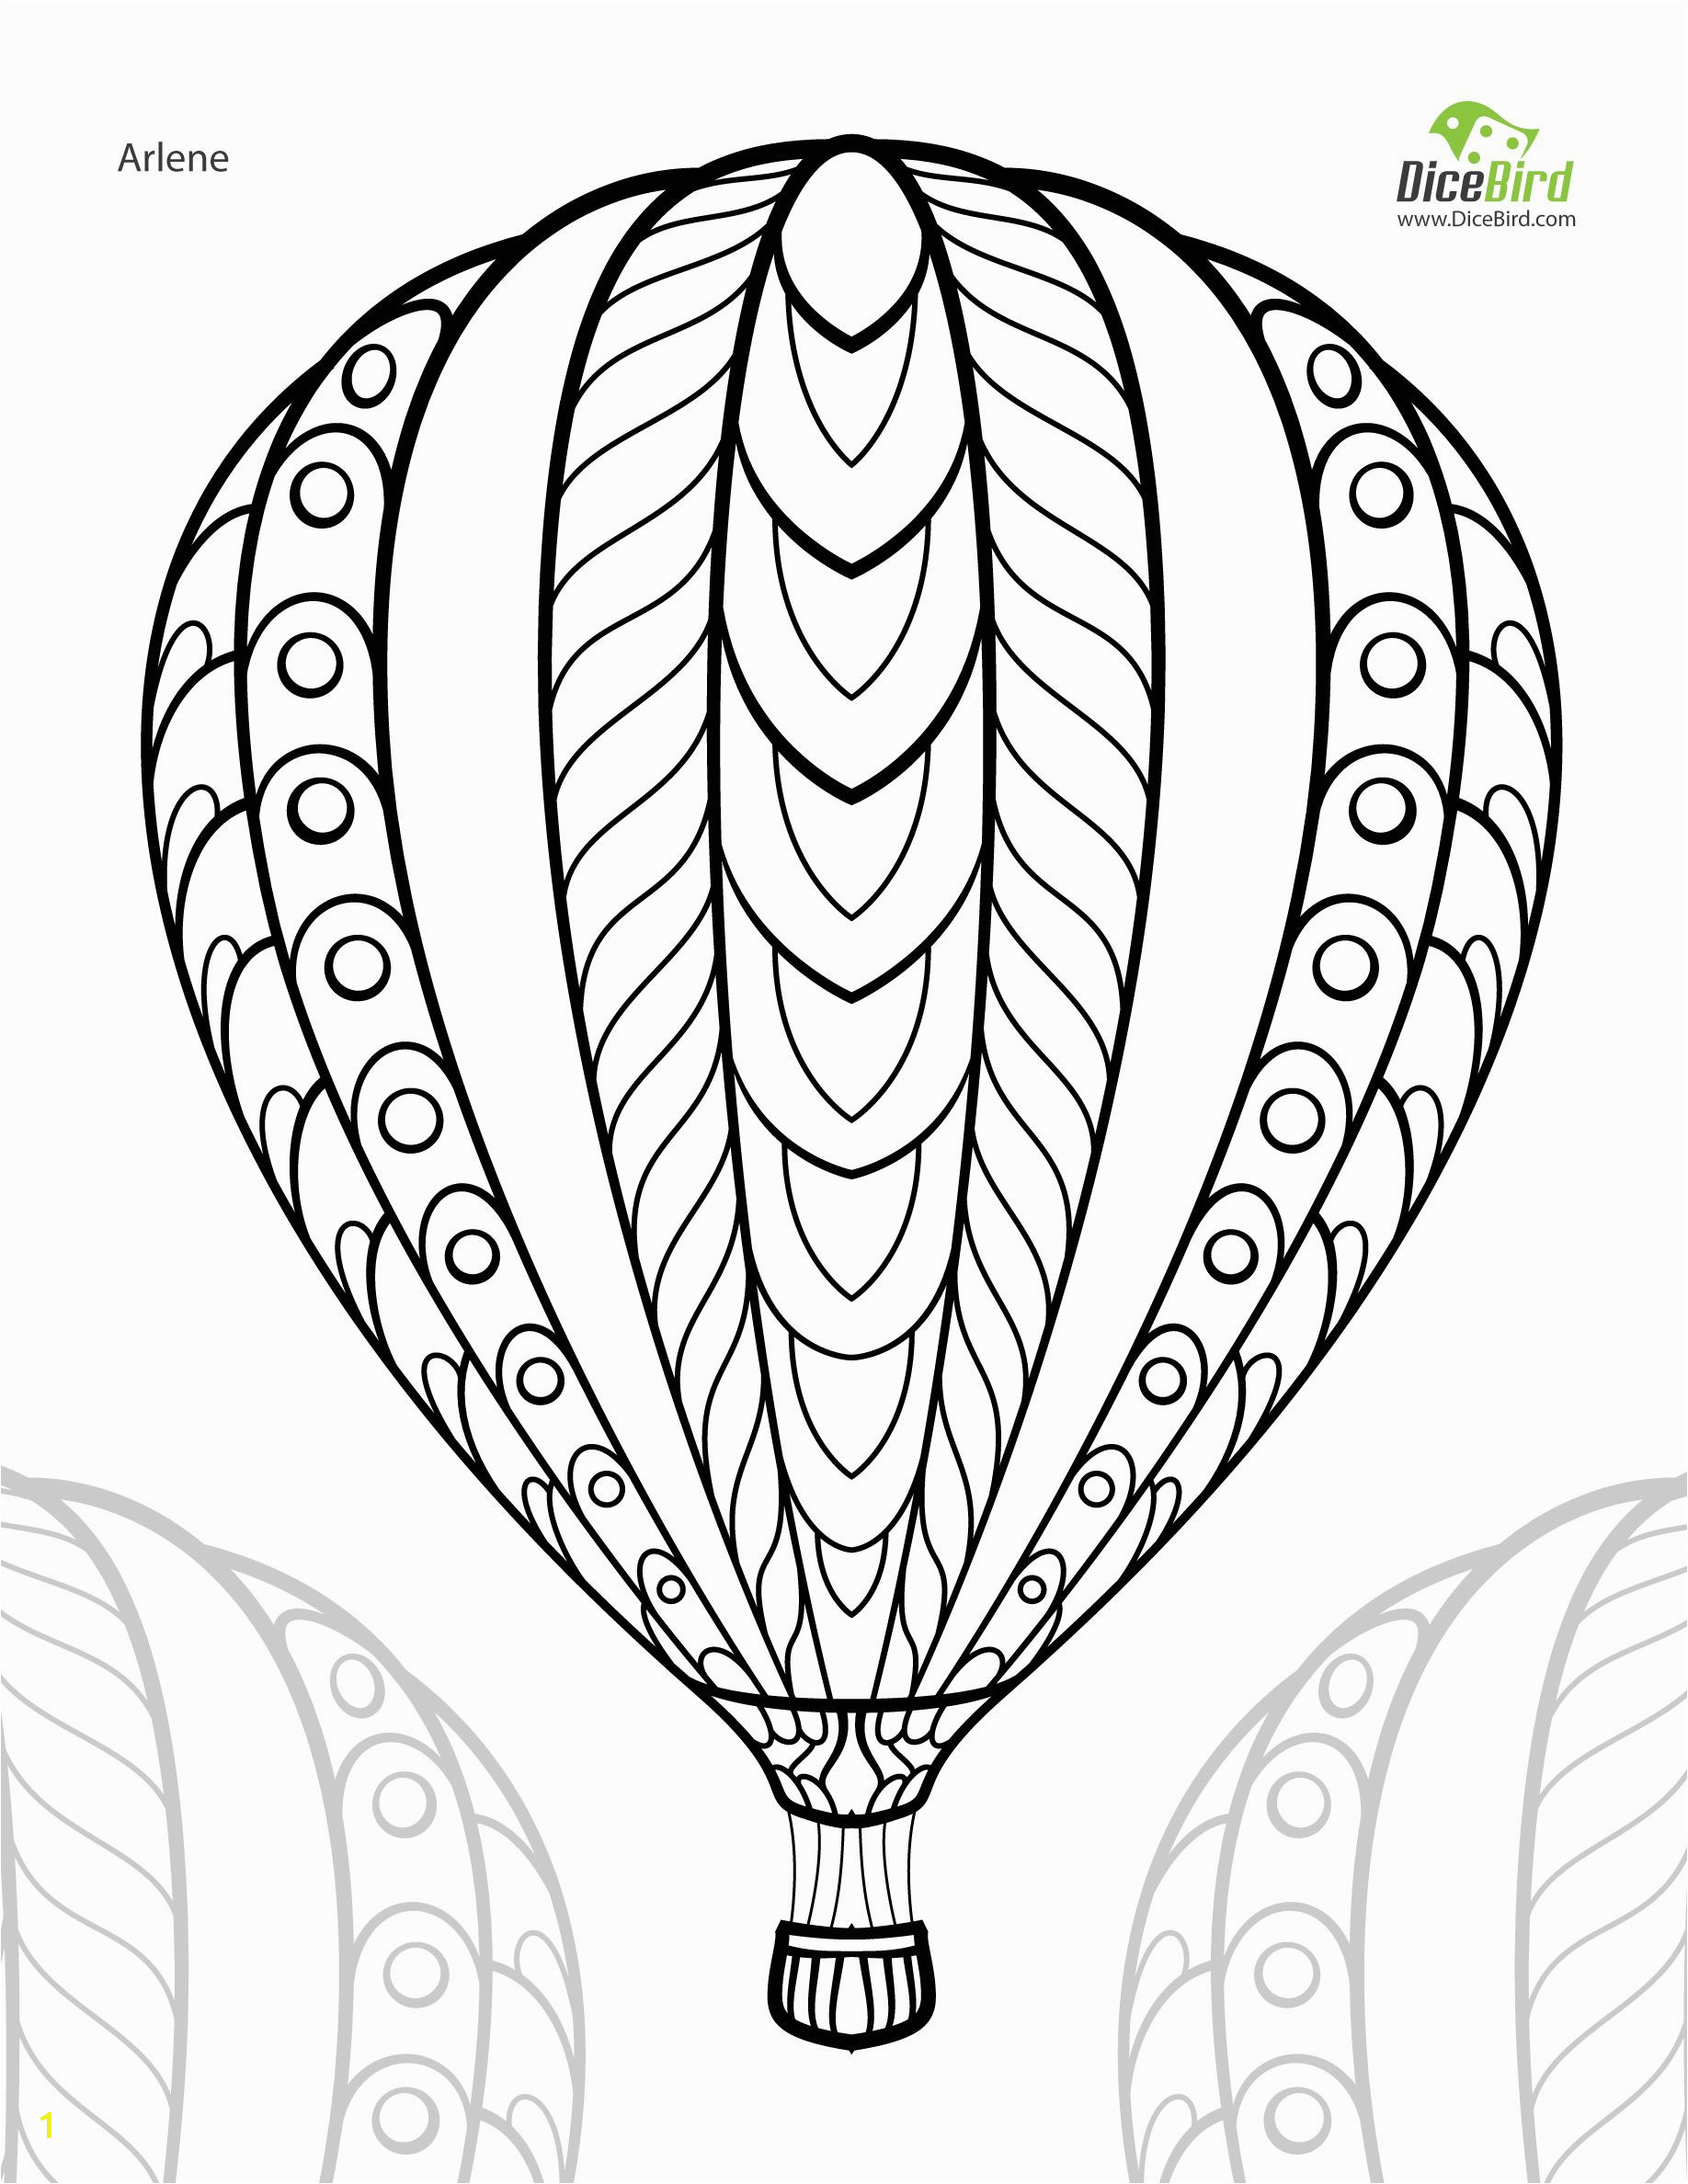 Hot Air Balloon Coloring Page for Adults Hot Air Balloon Coloring Pages for Adults – Learning How